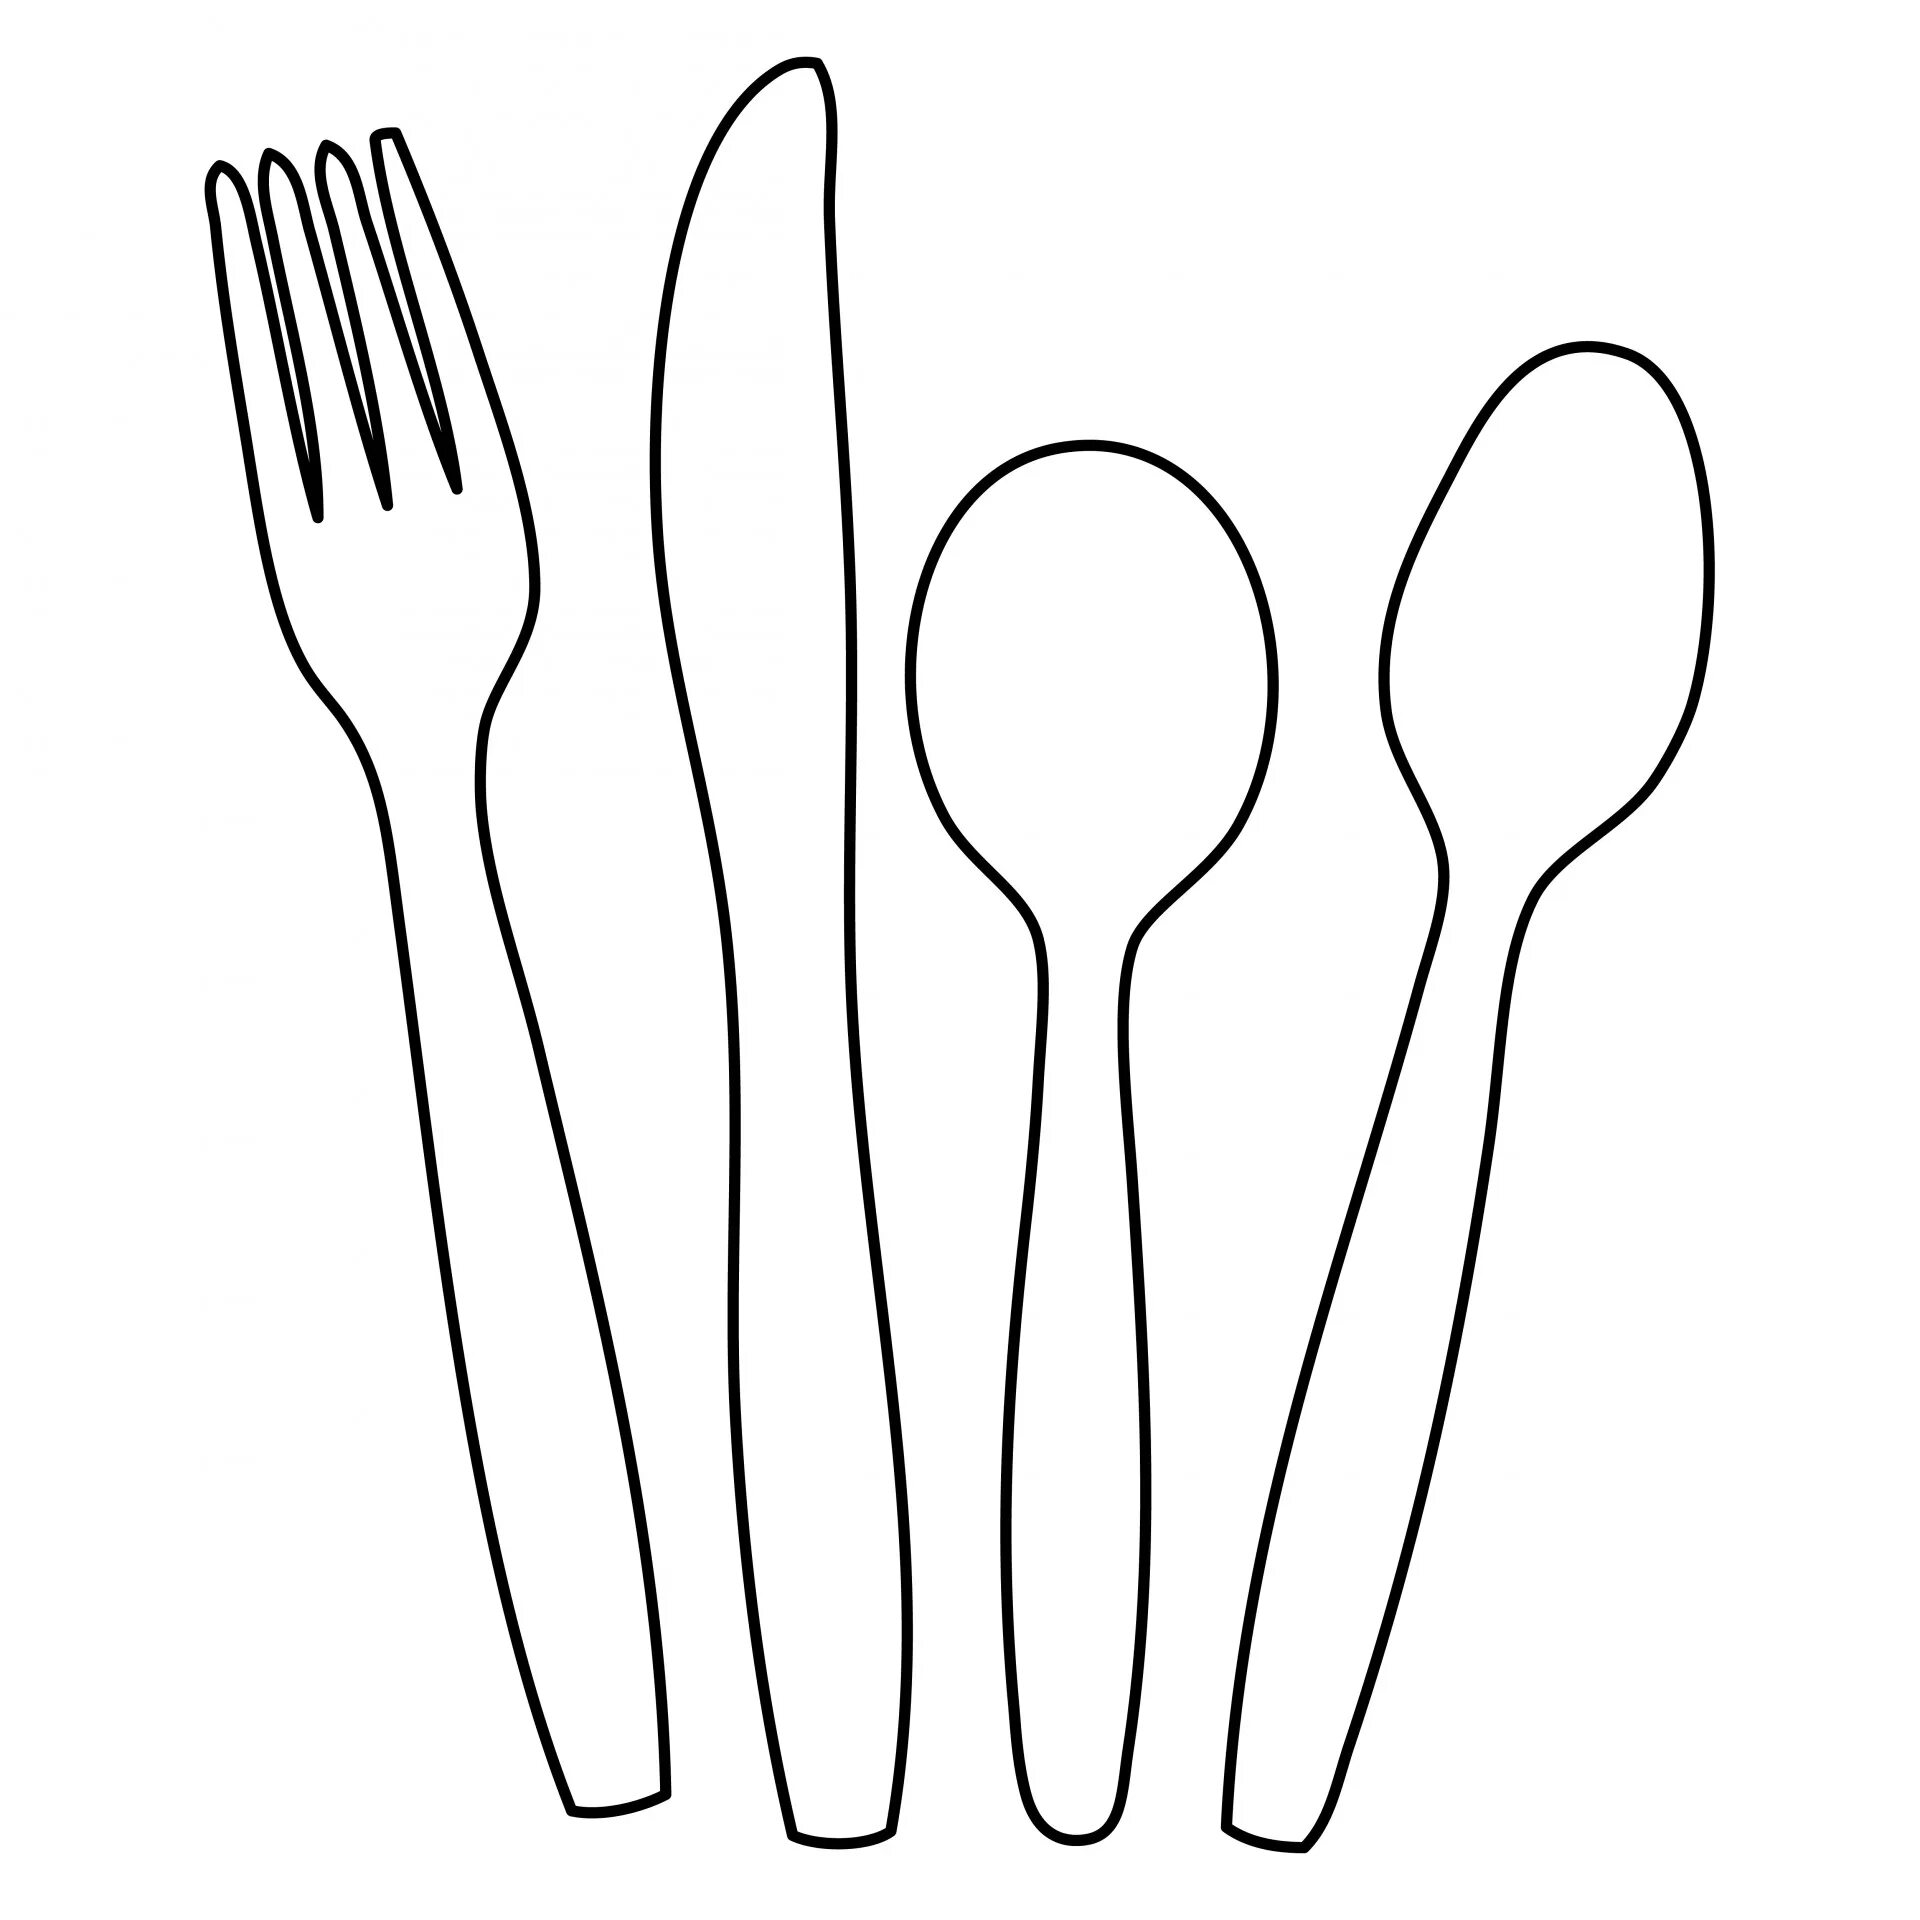 Fun coloring book for cutlery for preschoolers